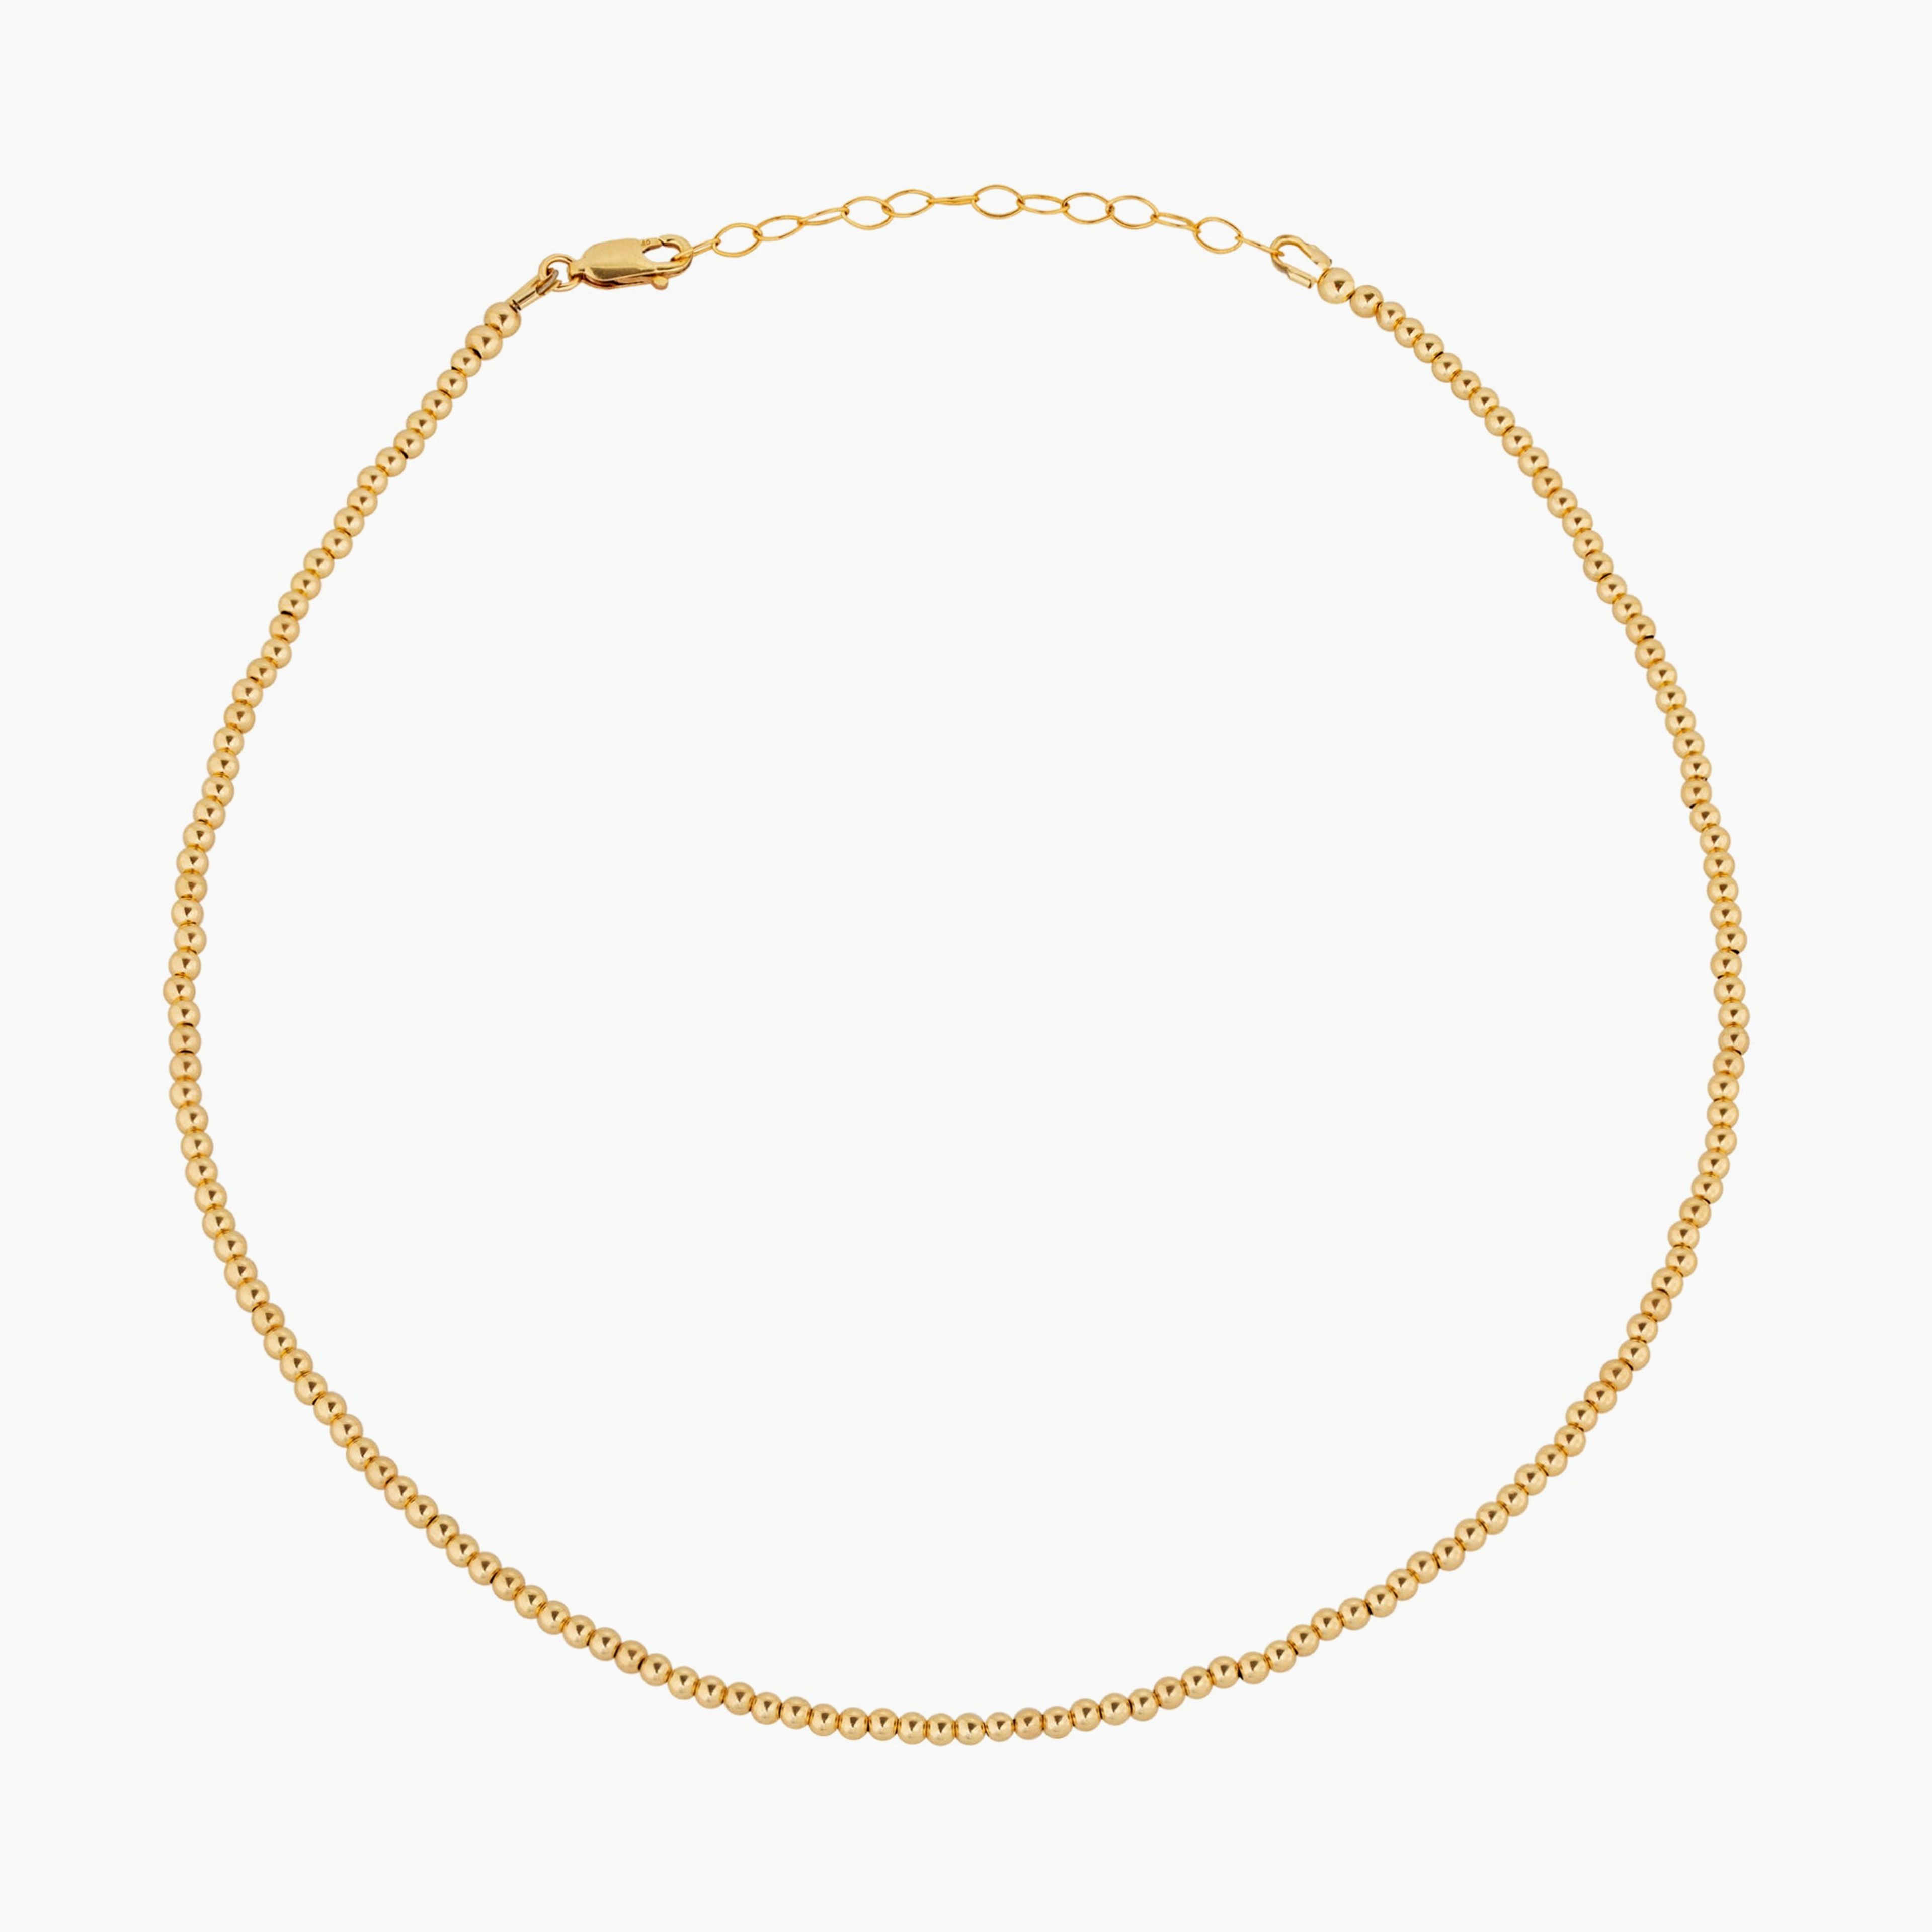 2.5 MM Gold Filled Beaded Necklace